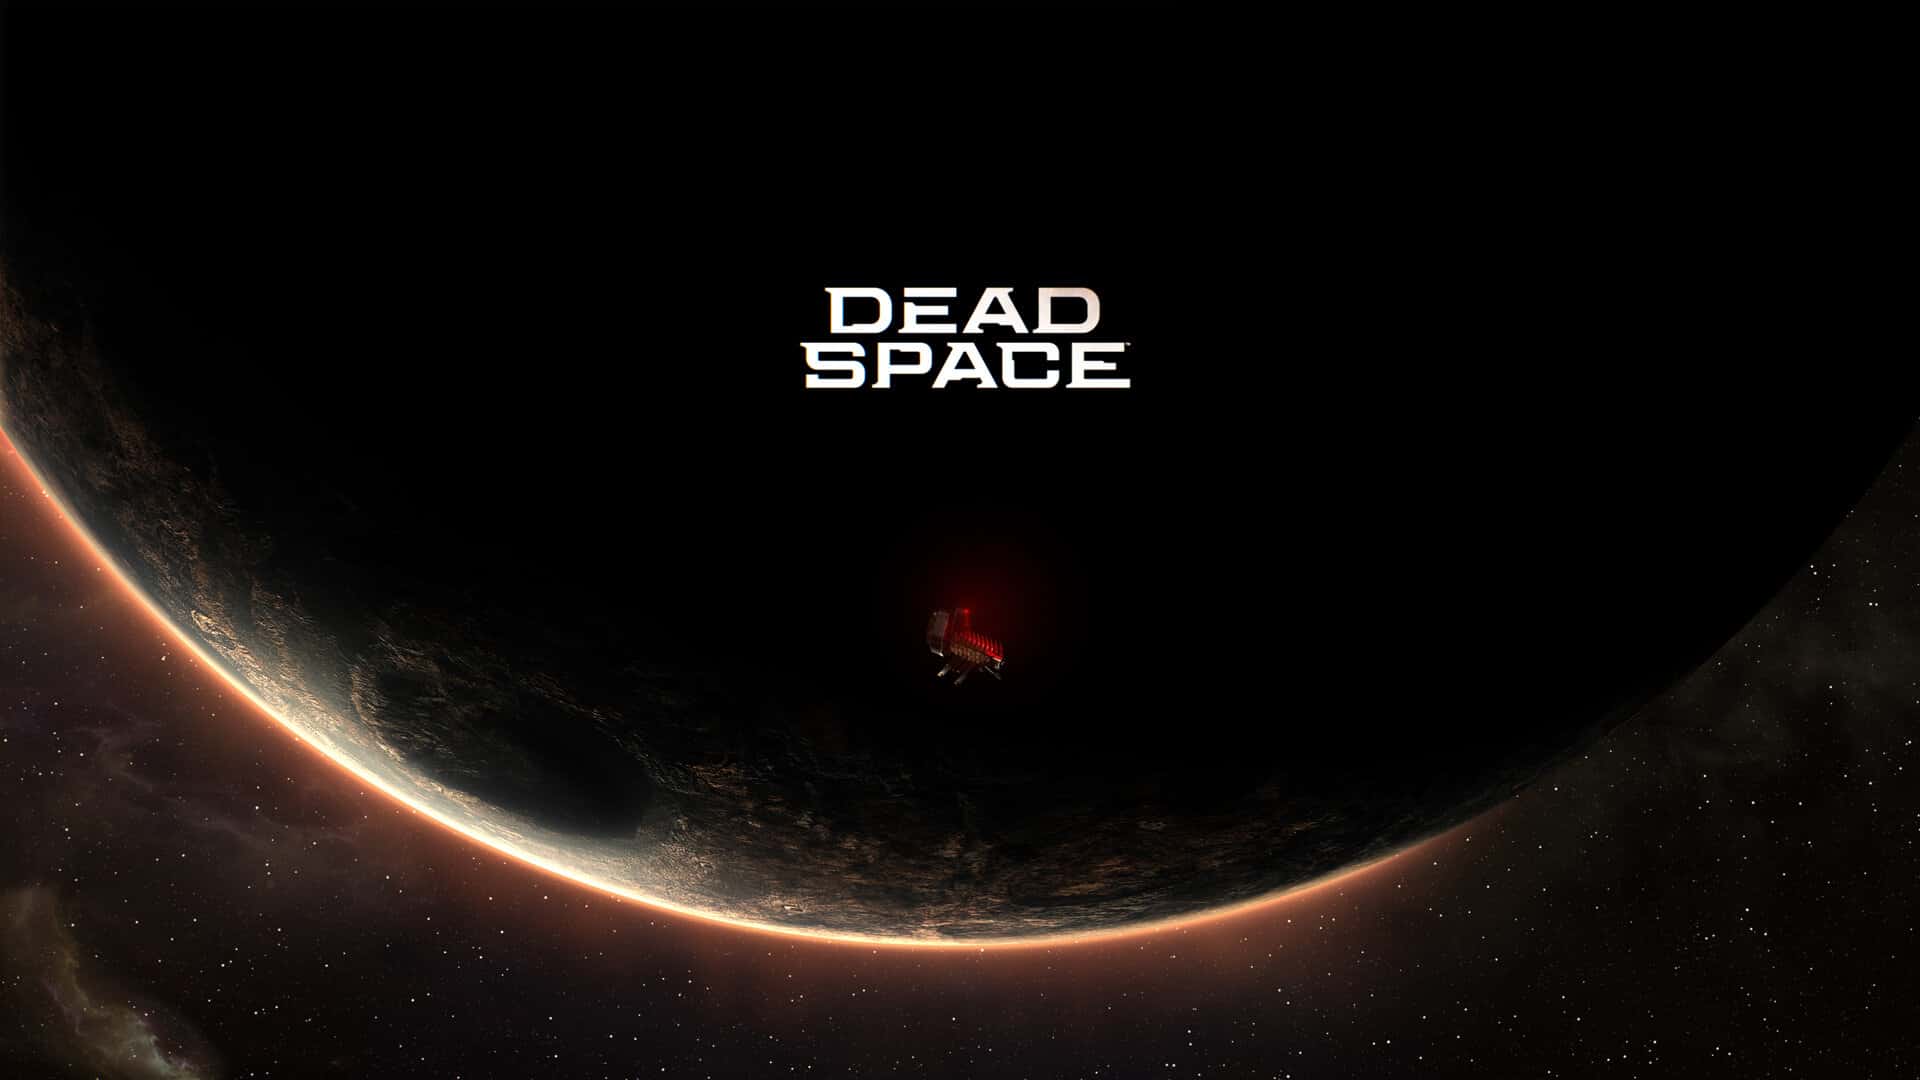 Dead Space remake promises a “very early look” in developer livestream this evening